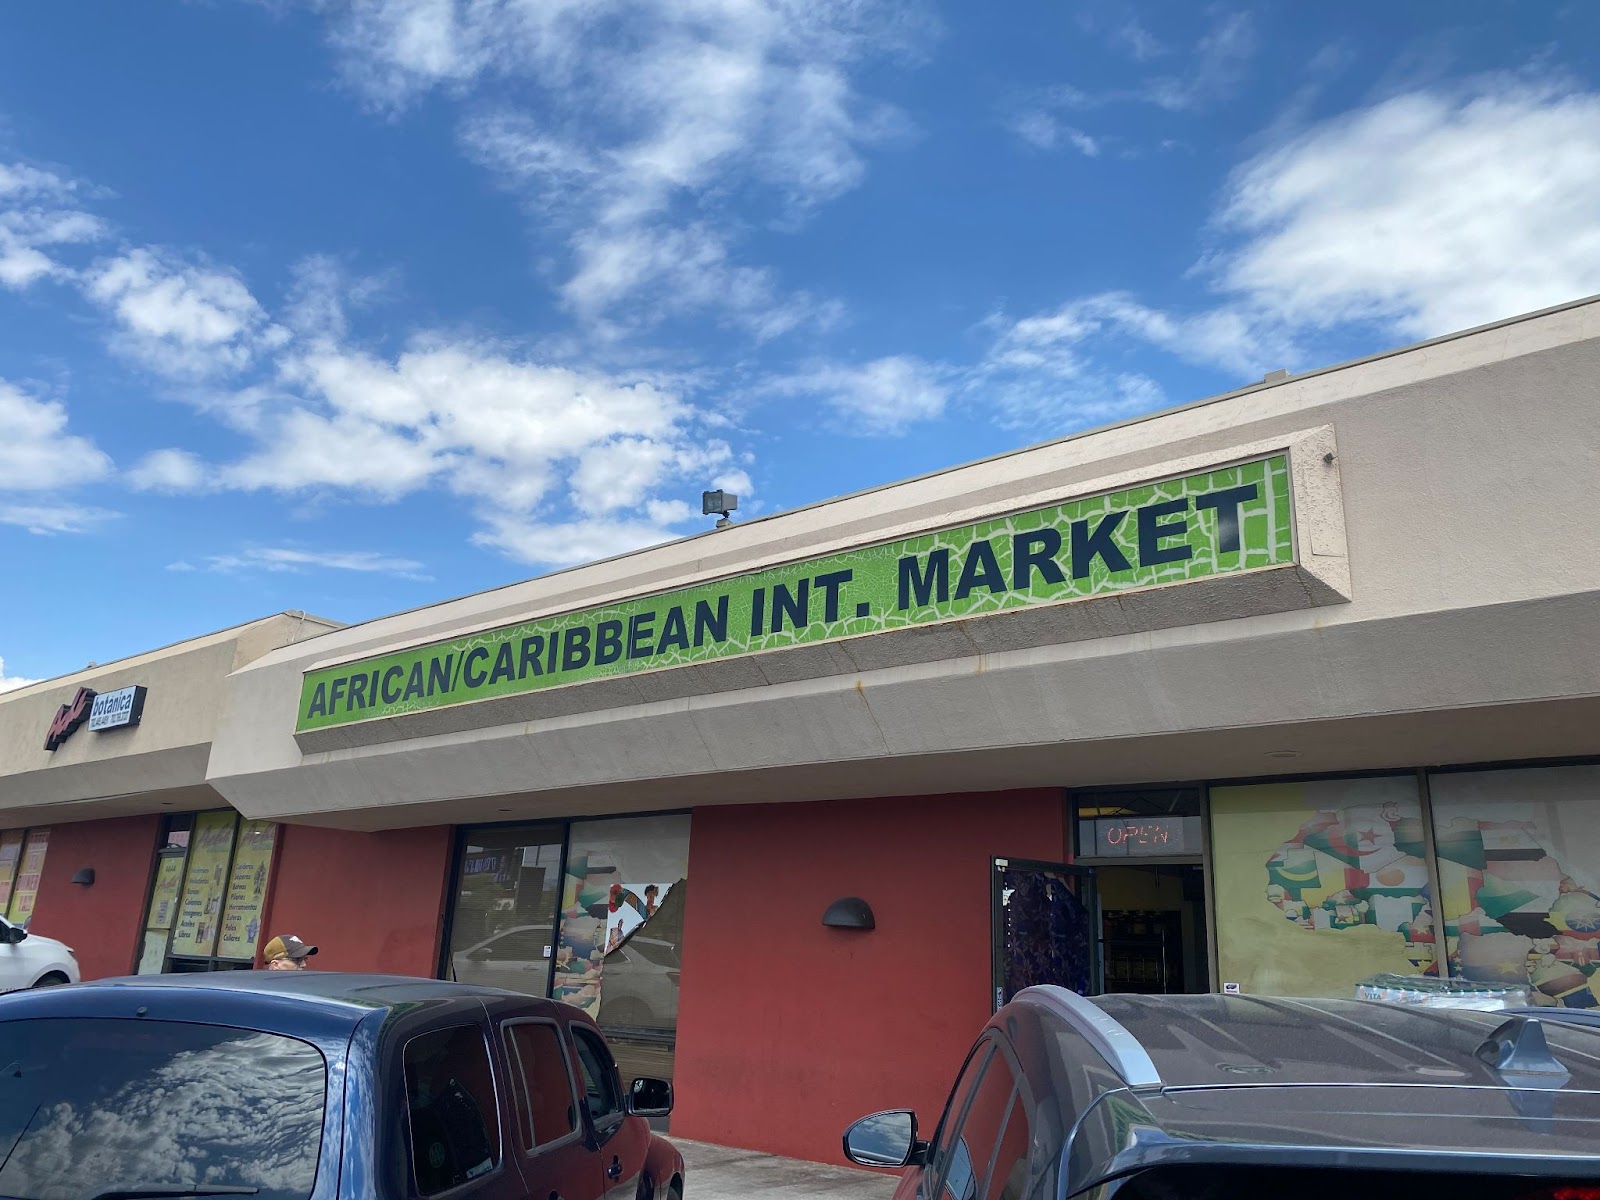 African/Caribbean international grocery stores